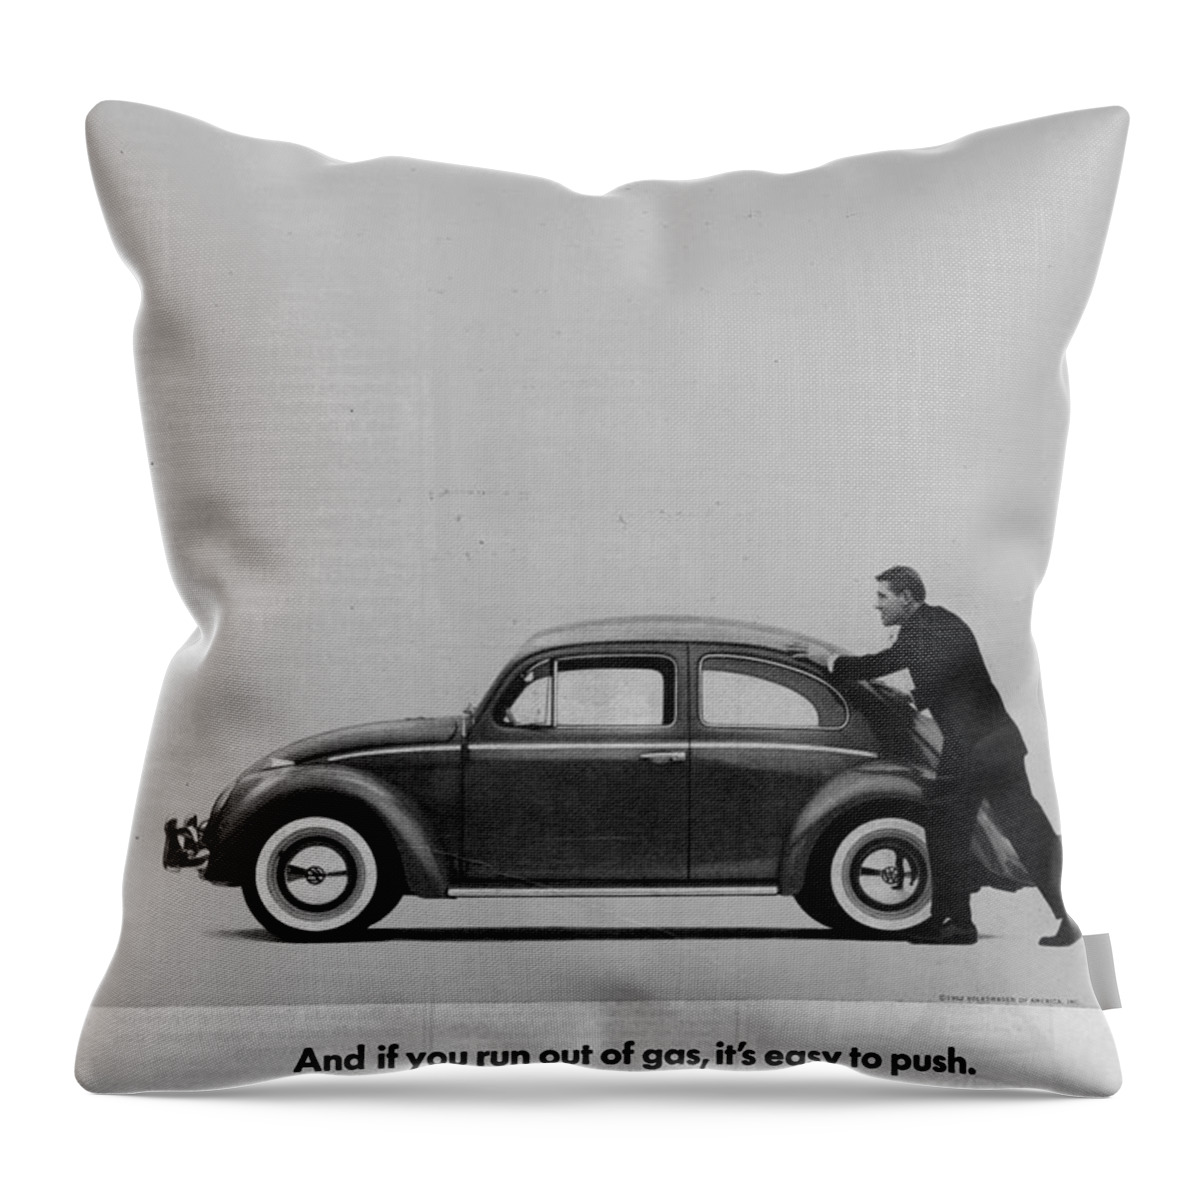 Vw Beetle Throw Pillow featuring the digital art VW Beetle Advert 1962 - And if you run out of gas it's easy to push by Georgia Fowler